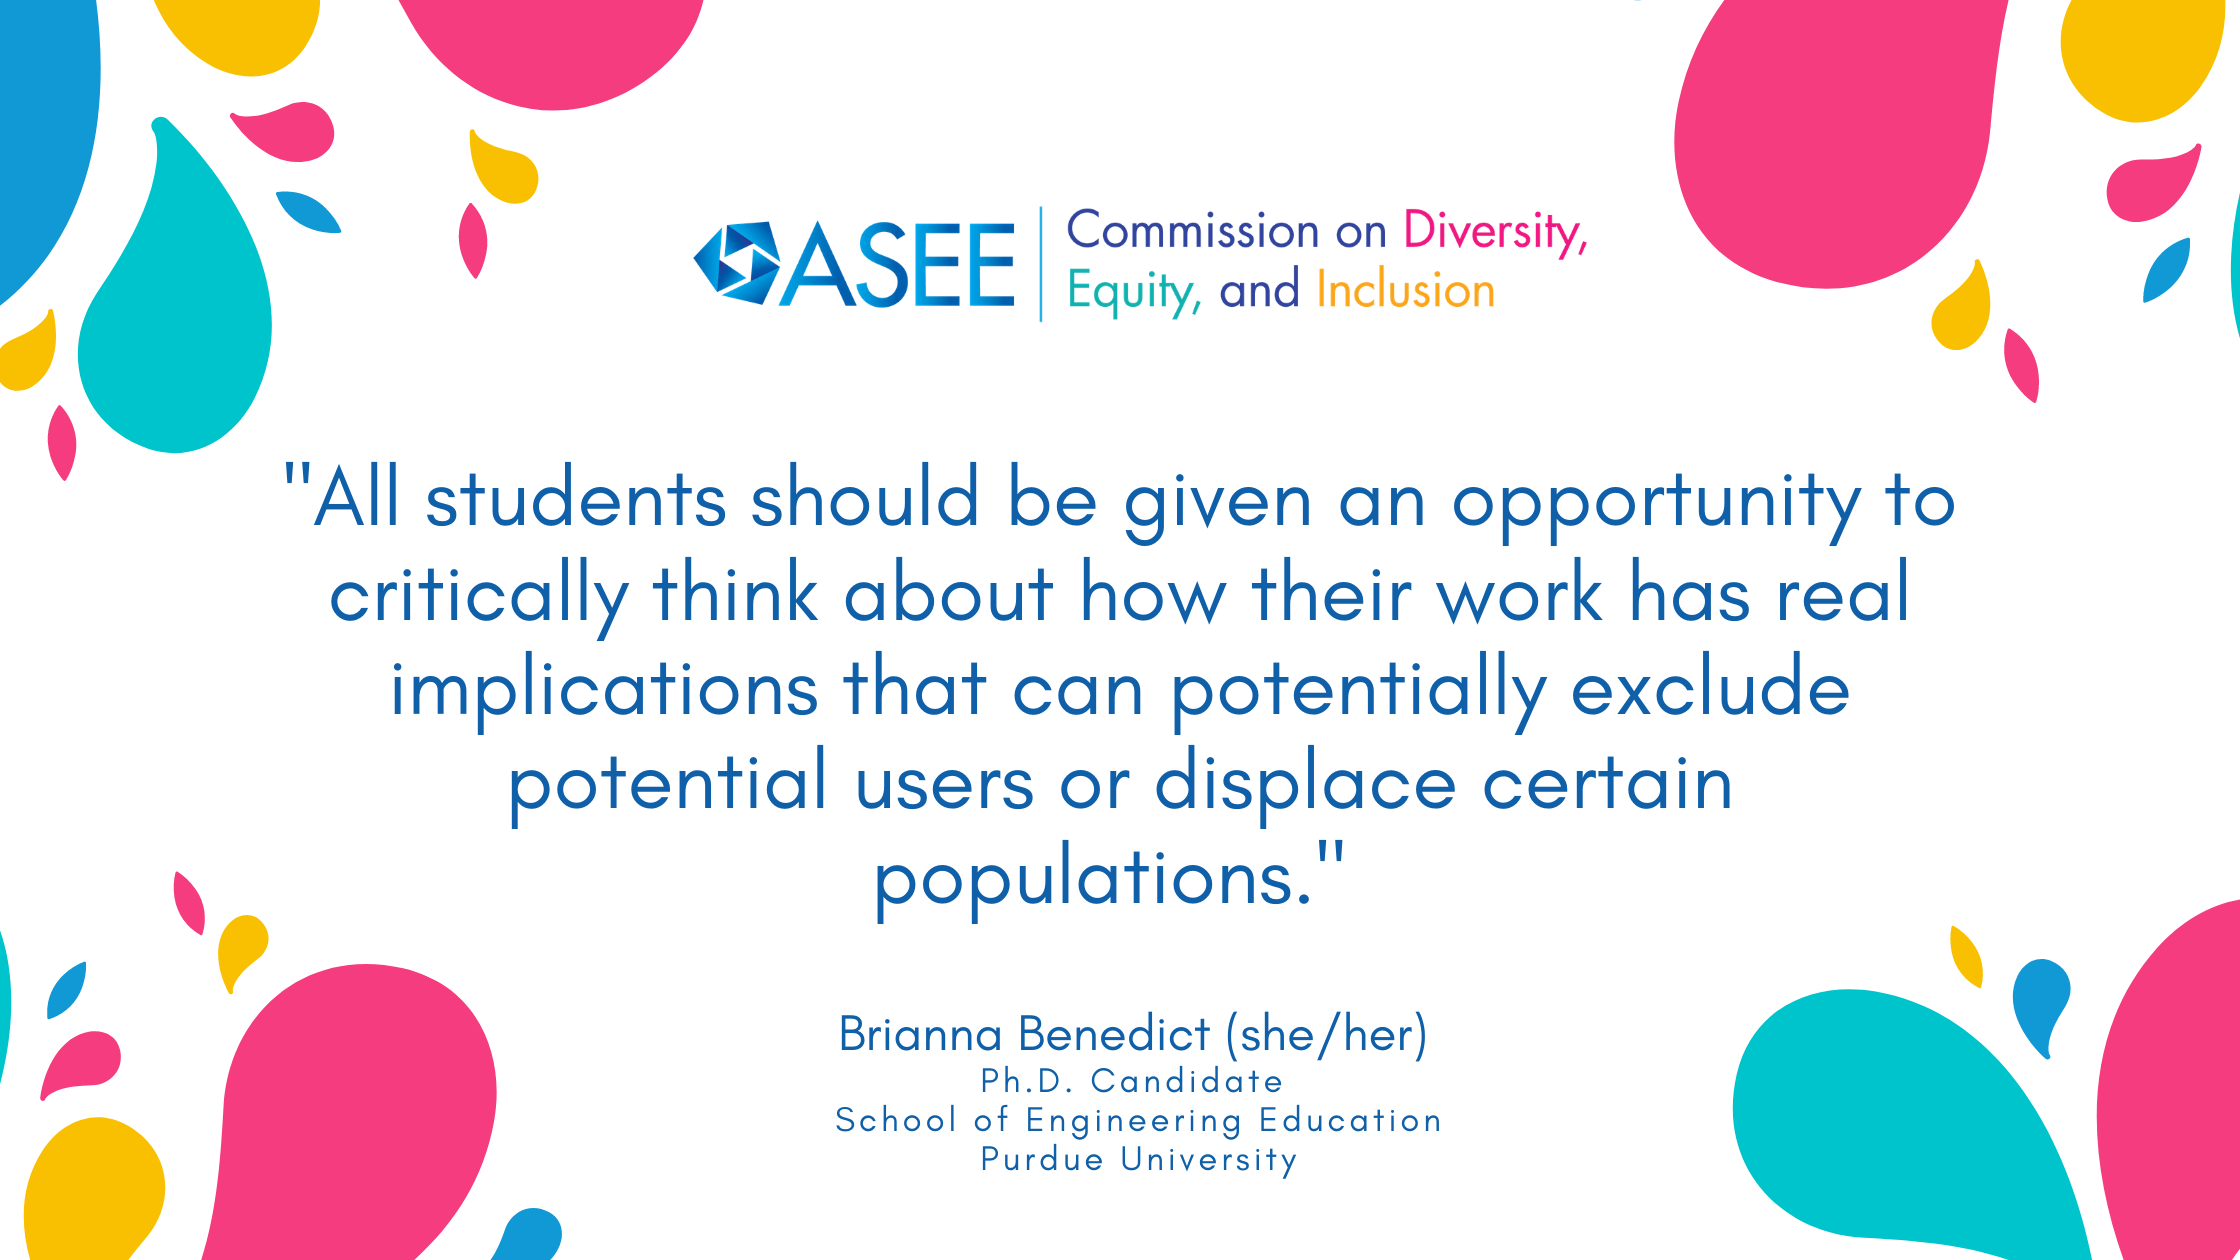 Quote: "All students should be given an opportunity to critically think about how their work has real implications that can potentially exclude potential users or displace certain populations."